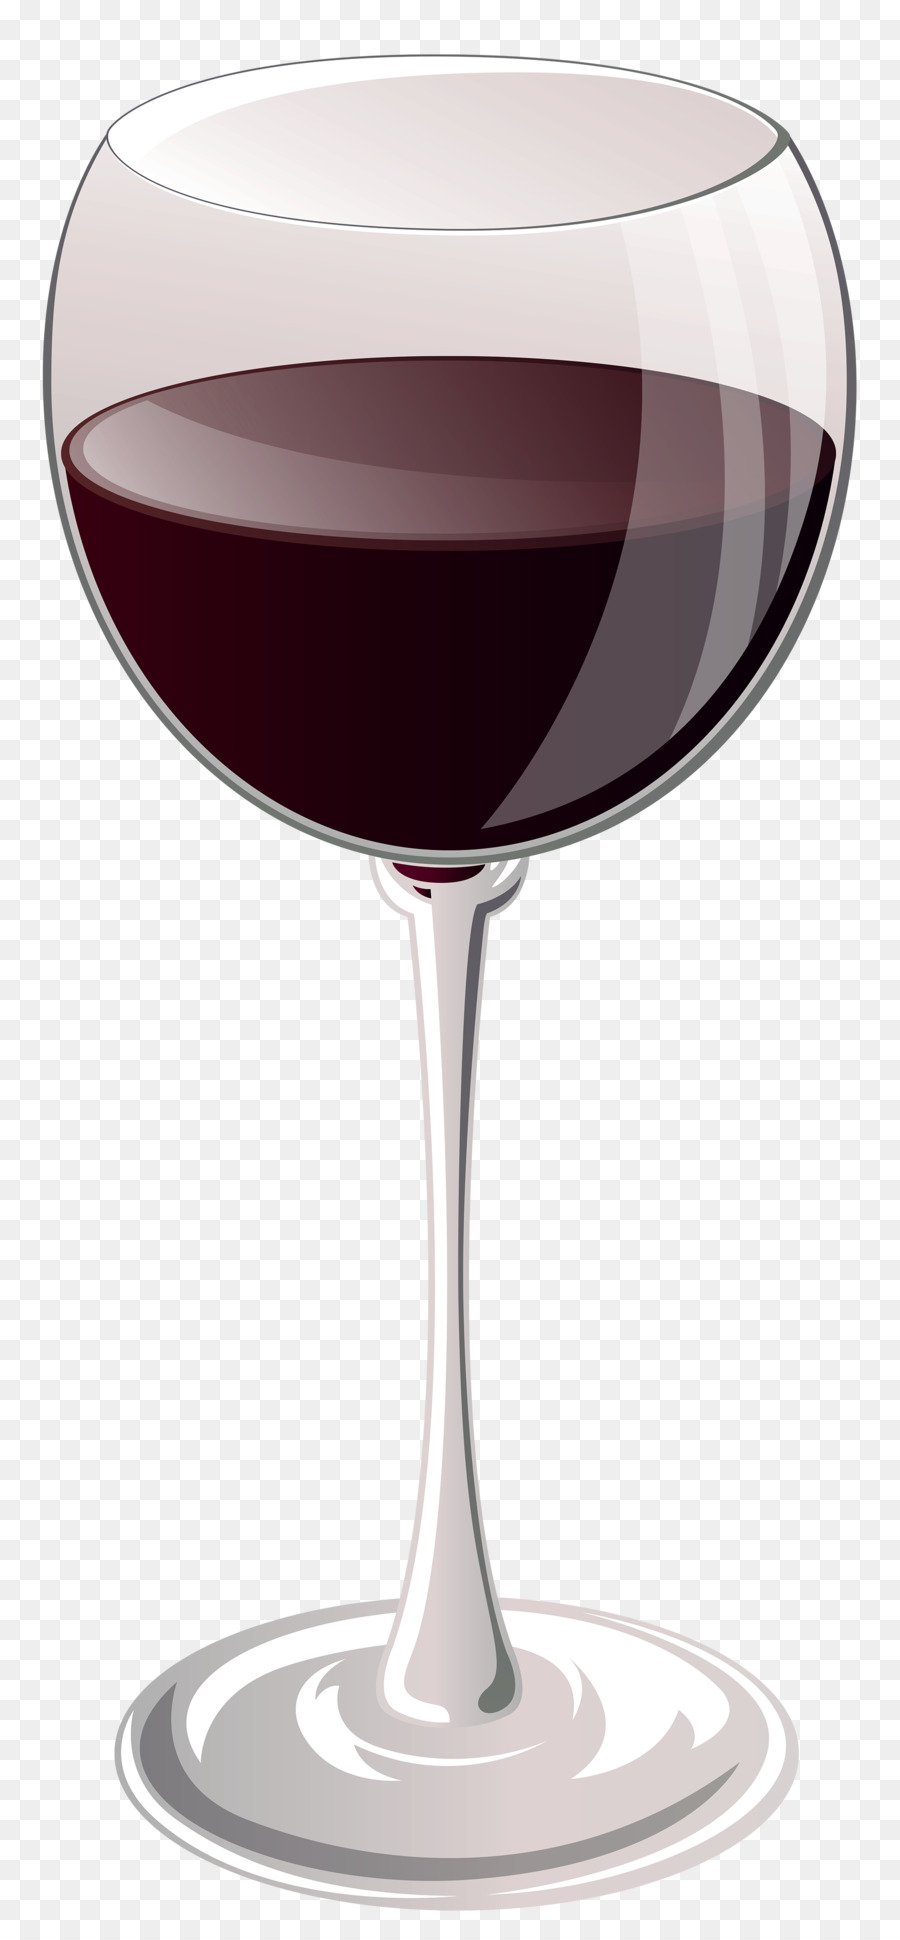 White wine Red Wine Champagne Clip art - Transparent Wine Cliparts png download - 1829*3928 - Free Transparent White Wine png Download.